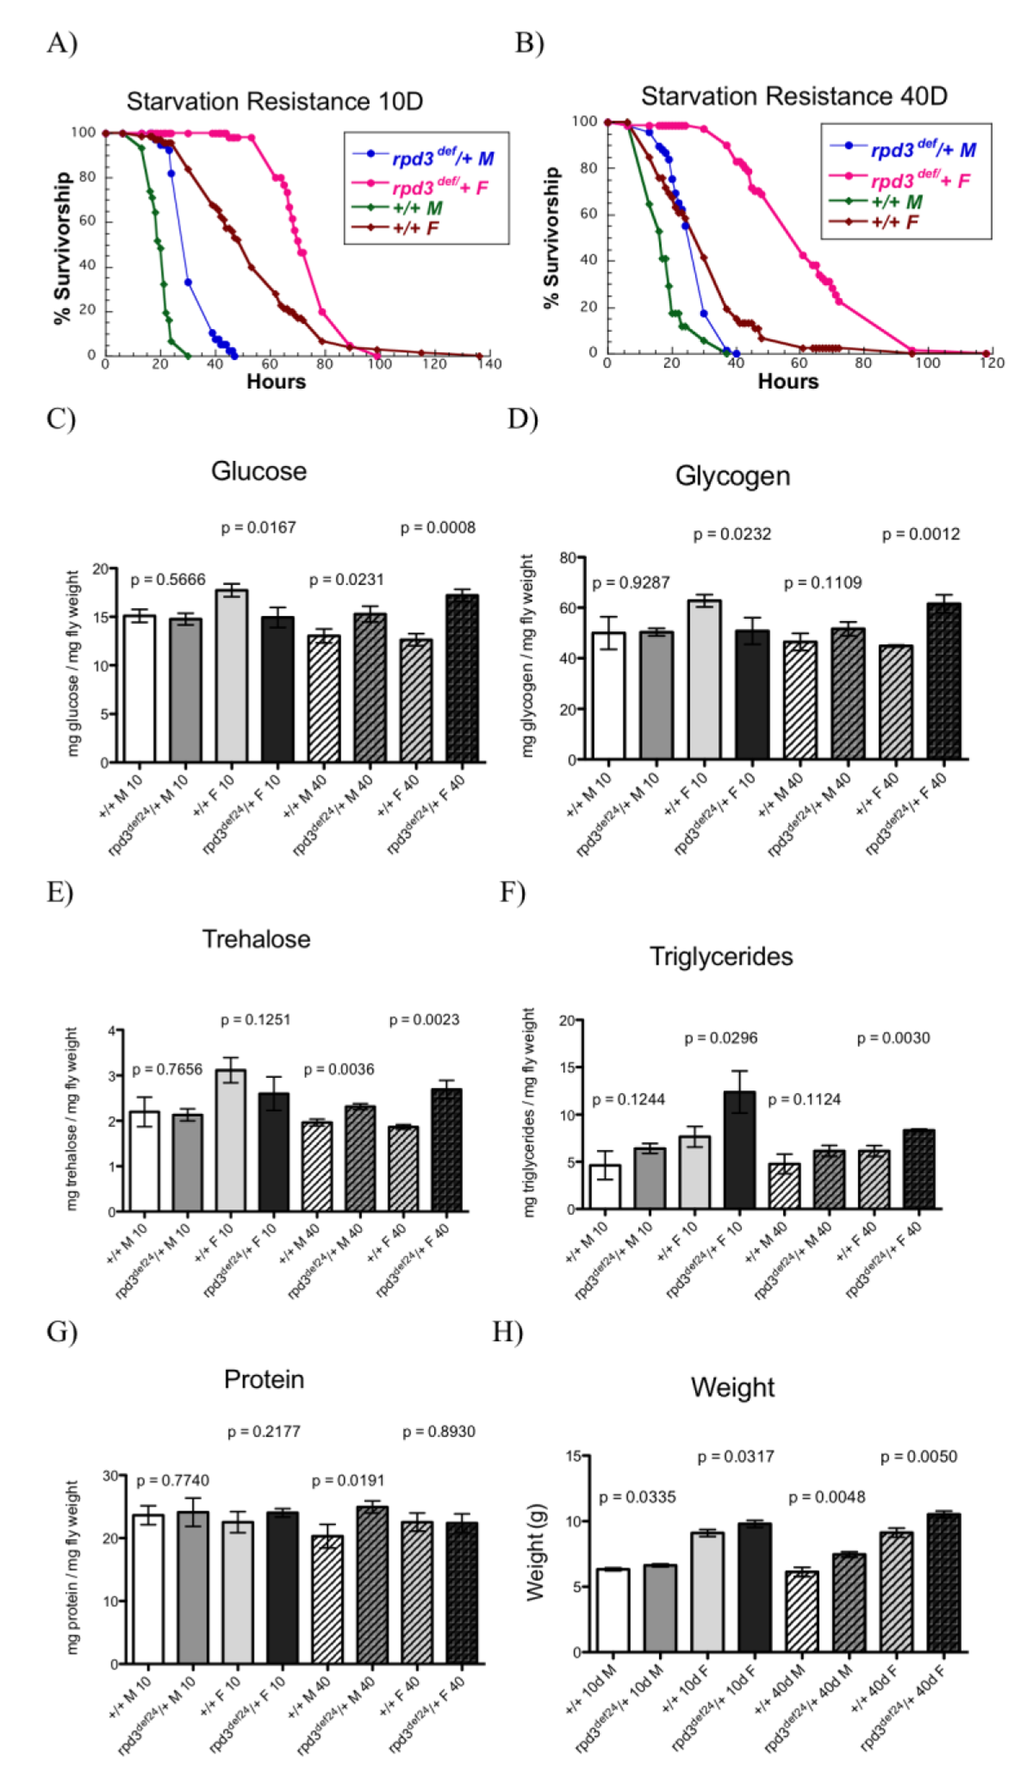 rpd3 reduction affects stress resistance and metabolism. (A,B) Reduced rpd3 levels increase stress resistance. Survival curves for male and female rpd3def/+ and control flies during starvation at age 10 (A) and 40 (B). (C-G) rpd3 reduction affects intermediary metabolism: Total levels of glucose (C), glycogen (D), trehalose (E), triglyceride (F) and protein (G) in rpd3def/+ and control male and female flies at age 10 and 40 days. (H) Weight of rpd3def and control flies used in C-G. Data are presented as means + SD (n=3, 30 flies per replicate. t test).